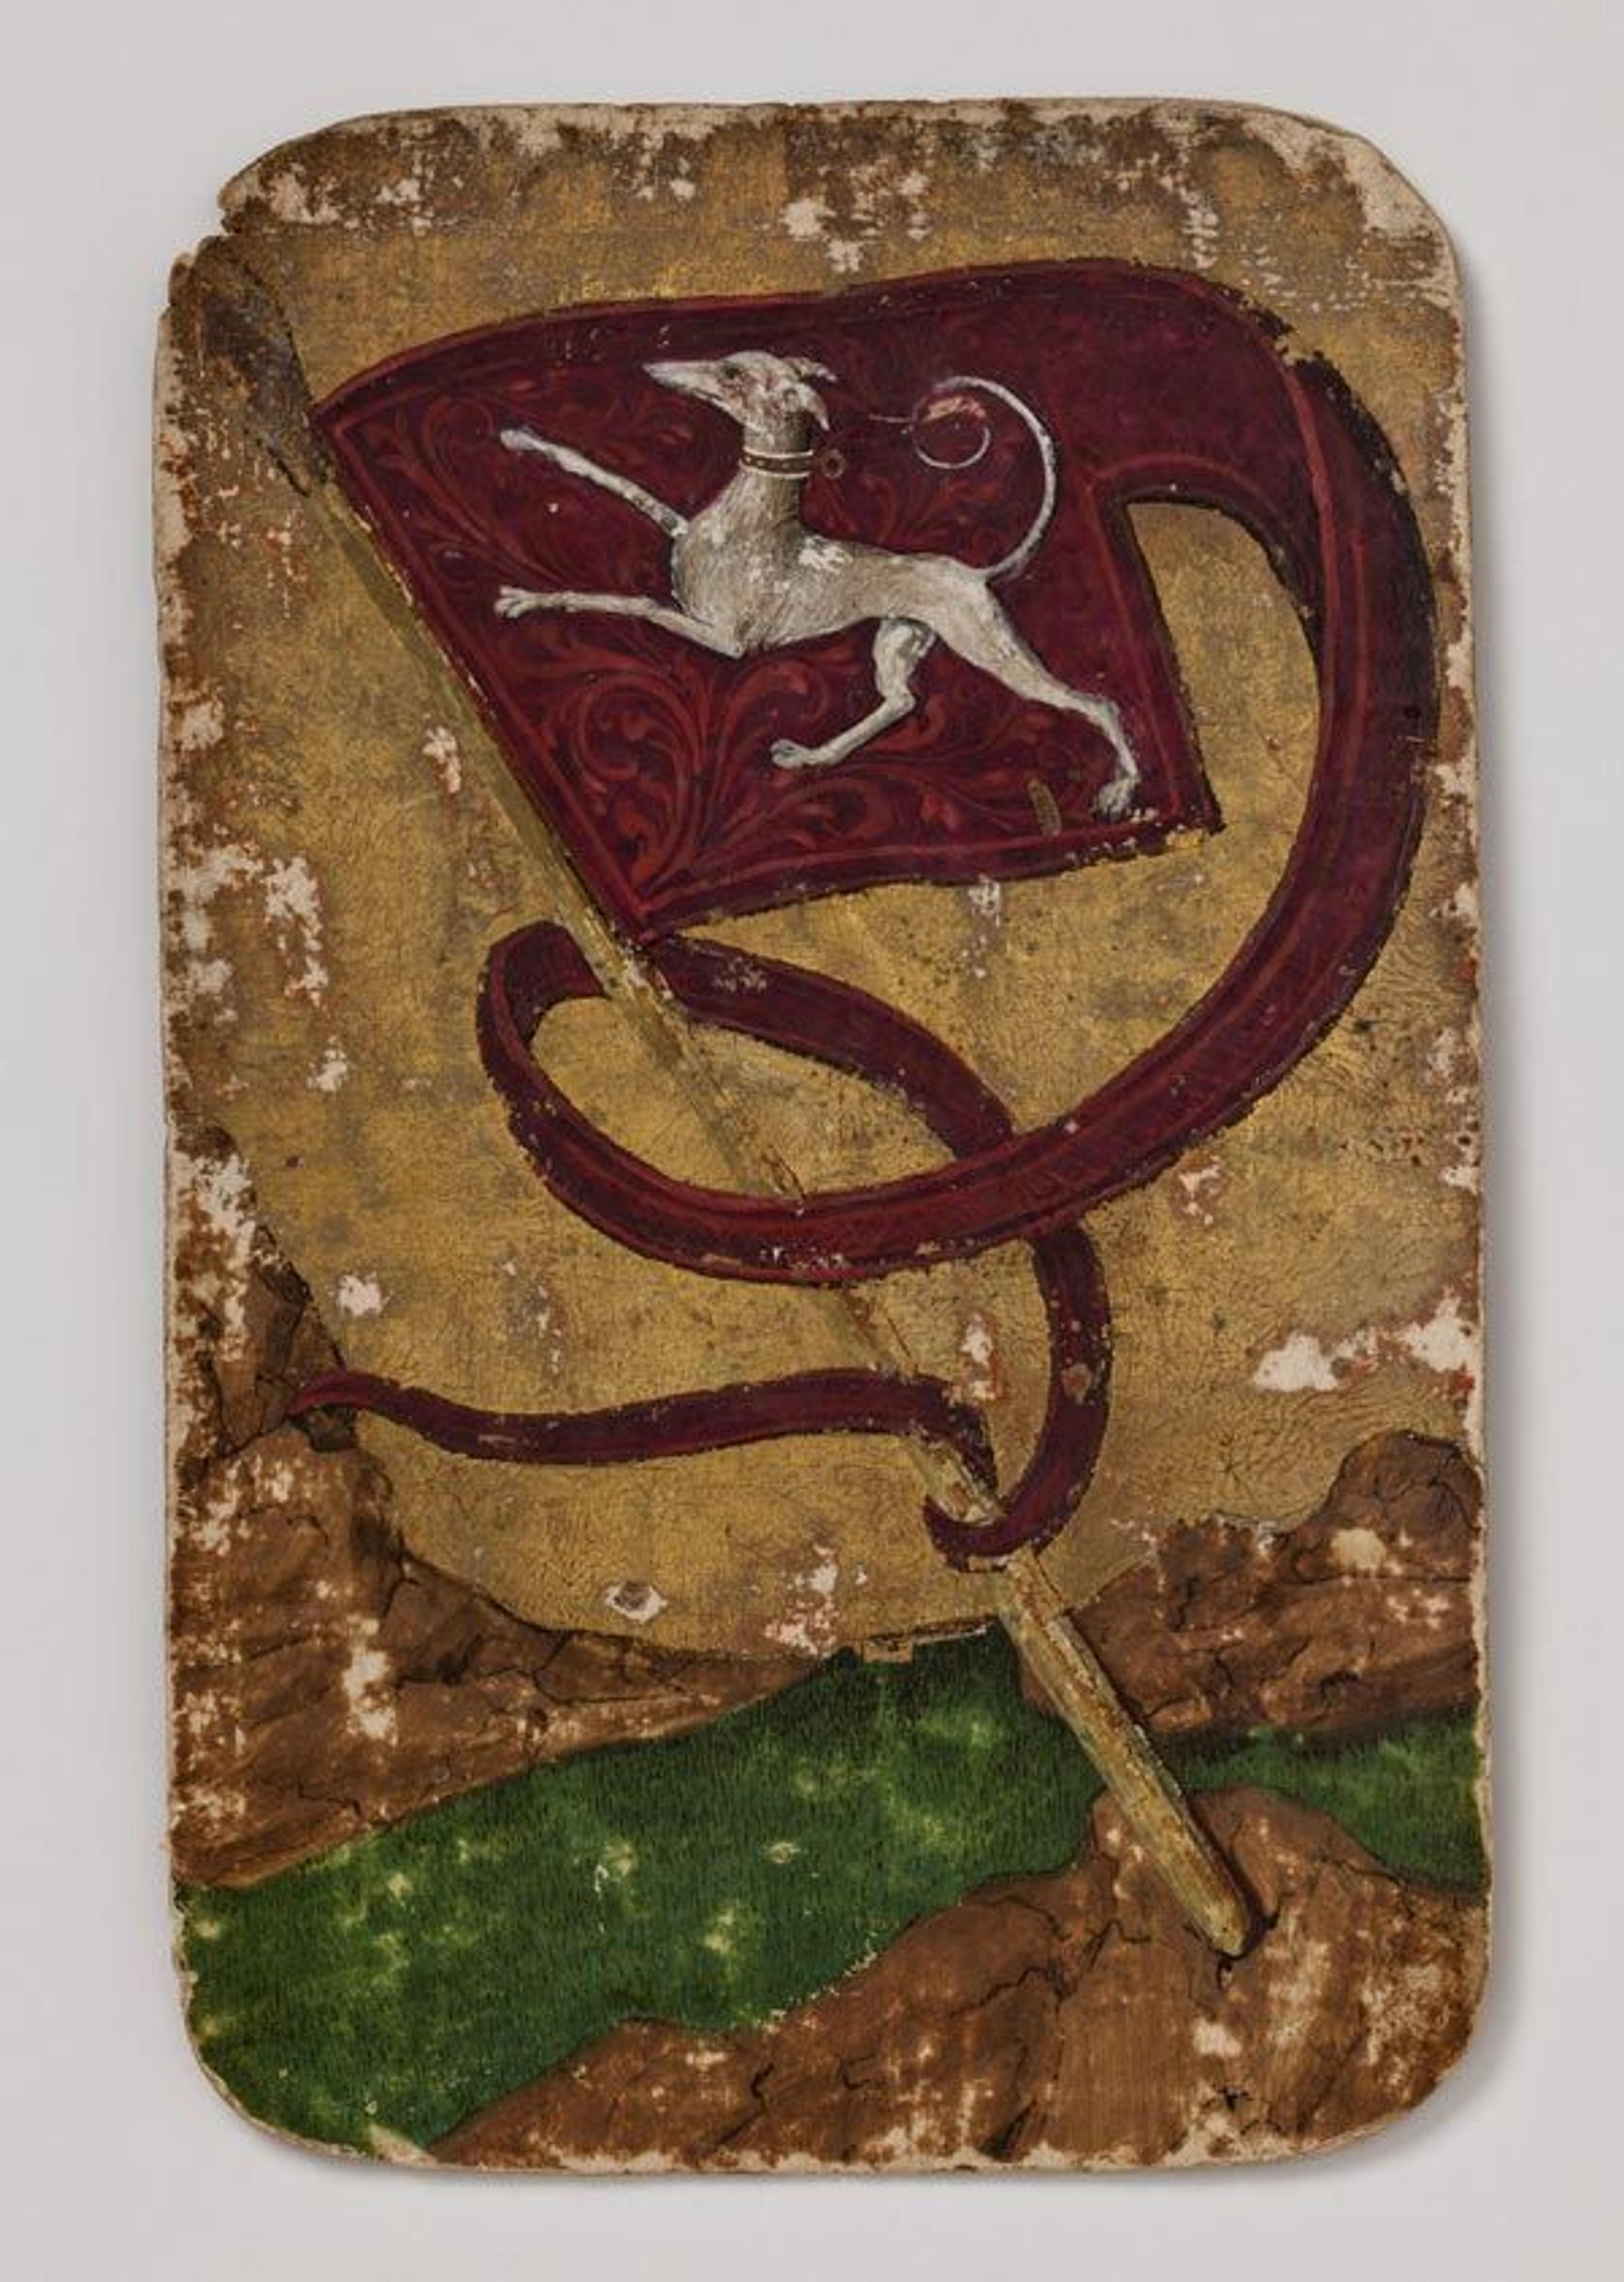 Banner (10) of Hounds from the The Stuttgart Playing Cards